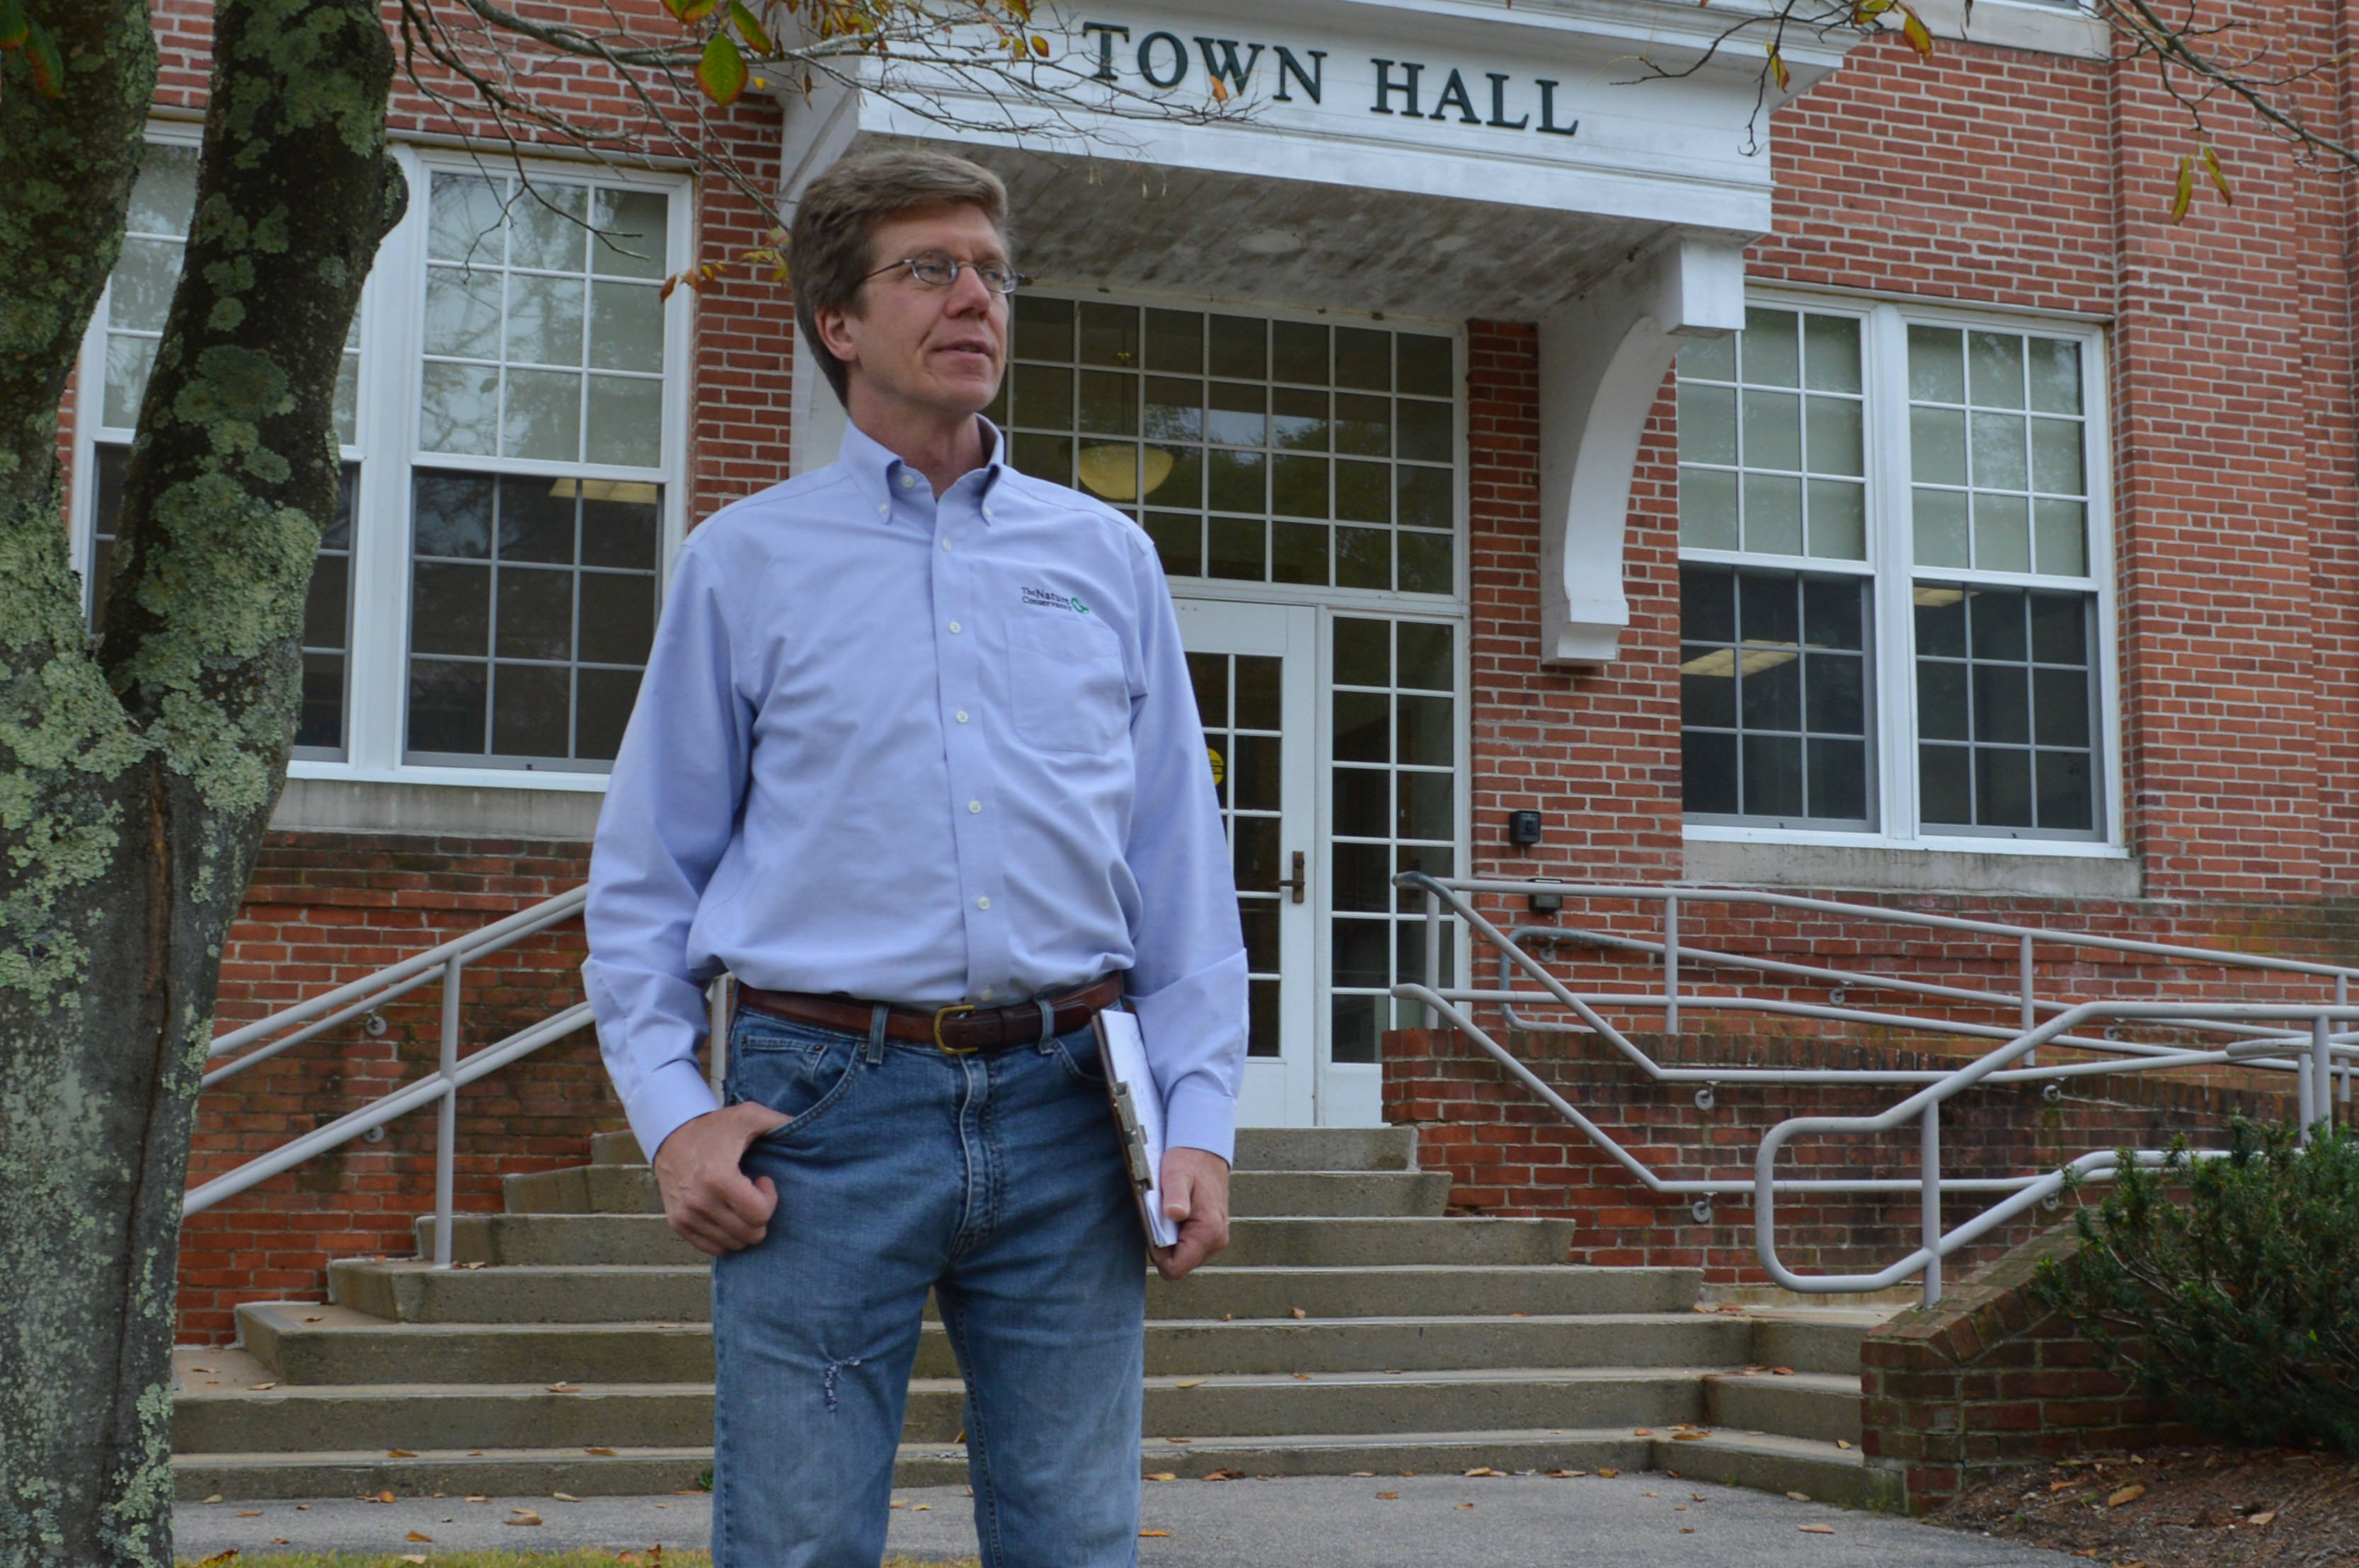 Steve Long stands in front of a town hall building holding a clipboard and looking into the distance.